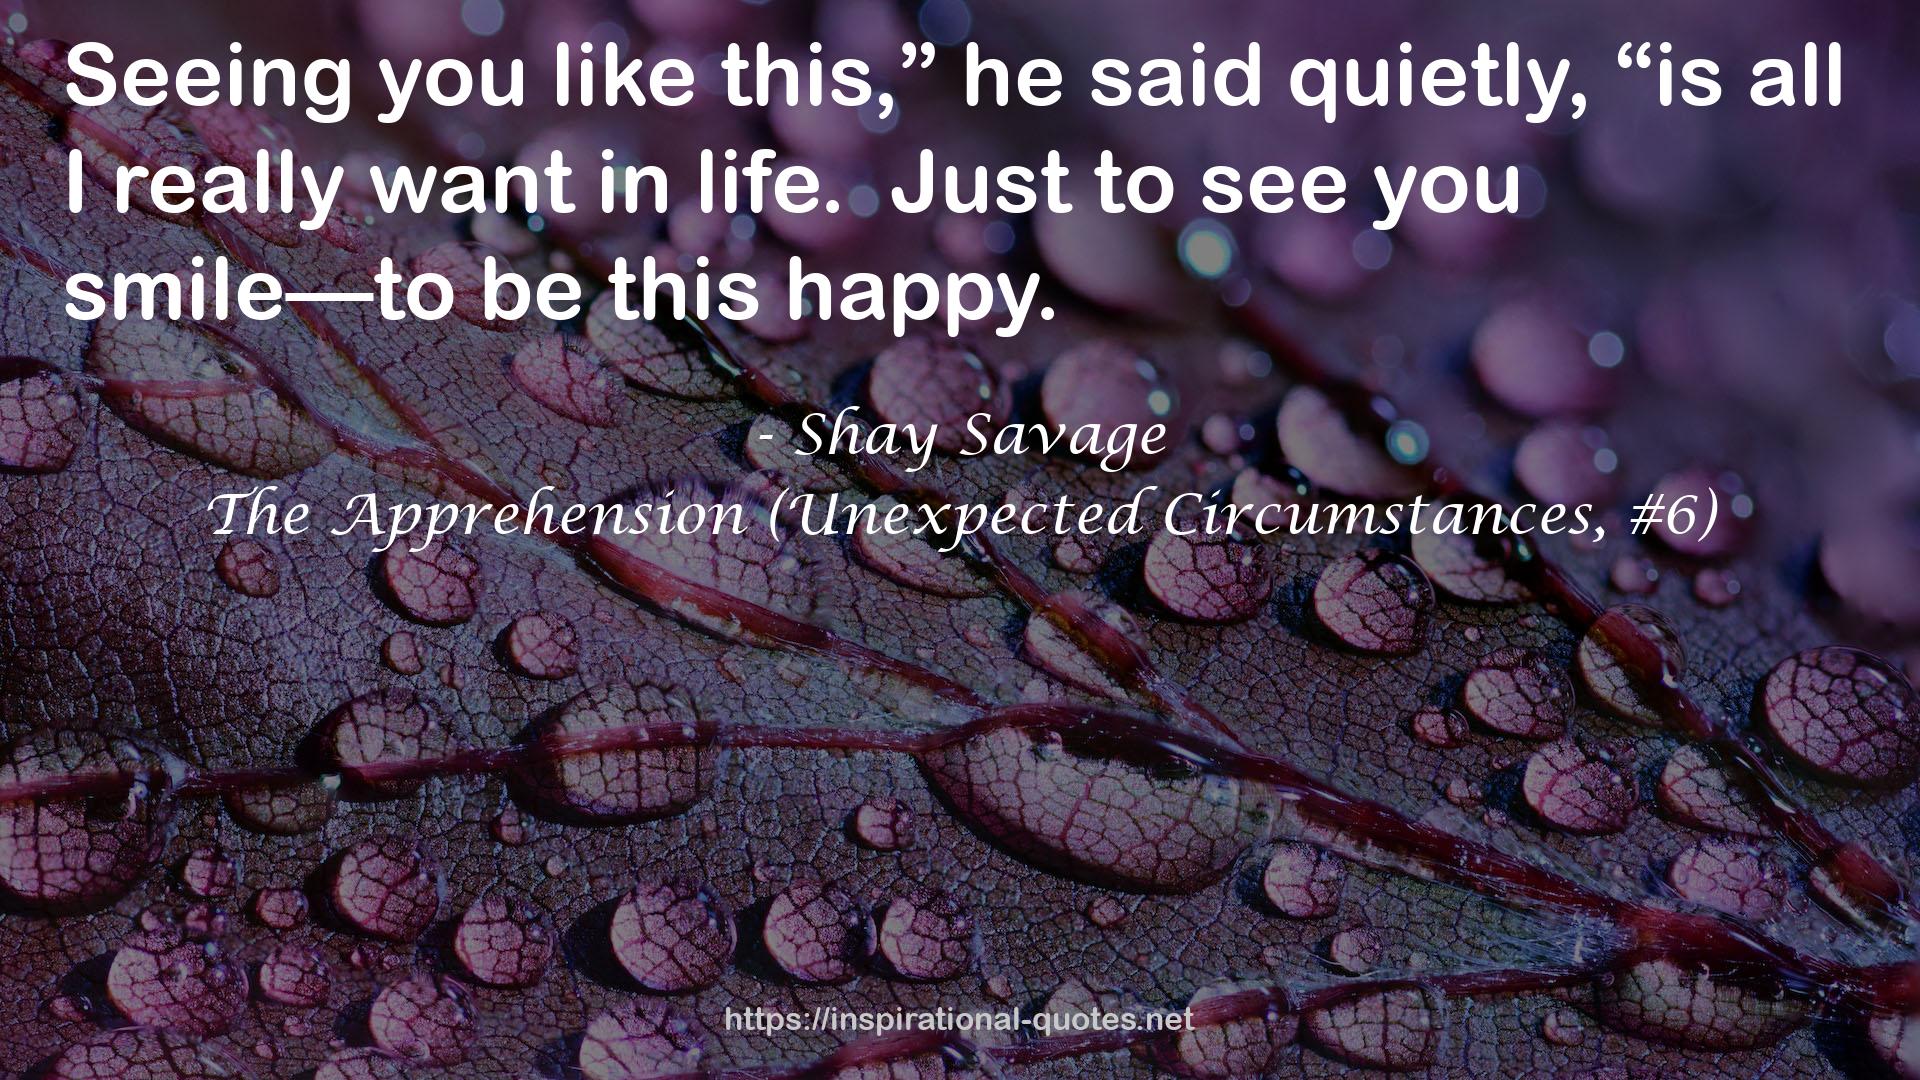 The Apprehension (Unexpected Circumstances, #6) QUOTES